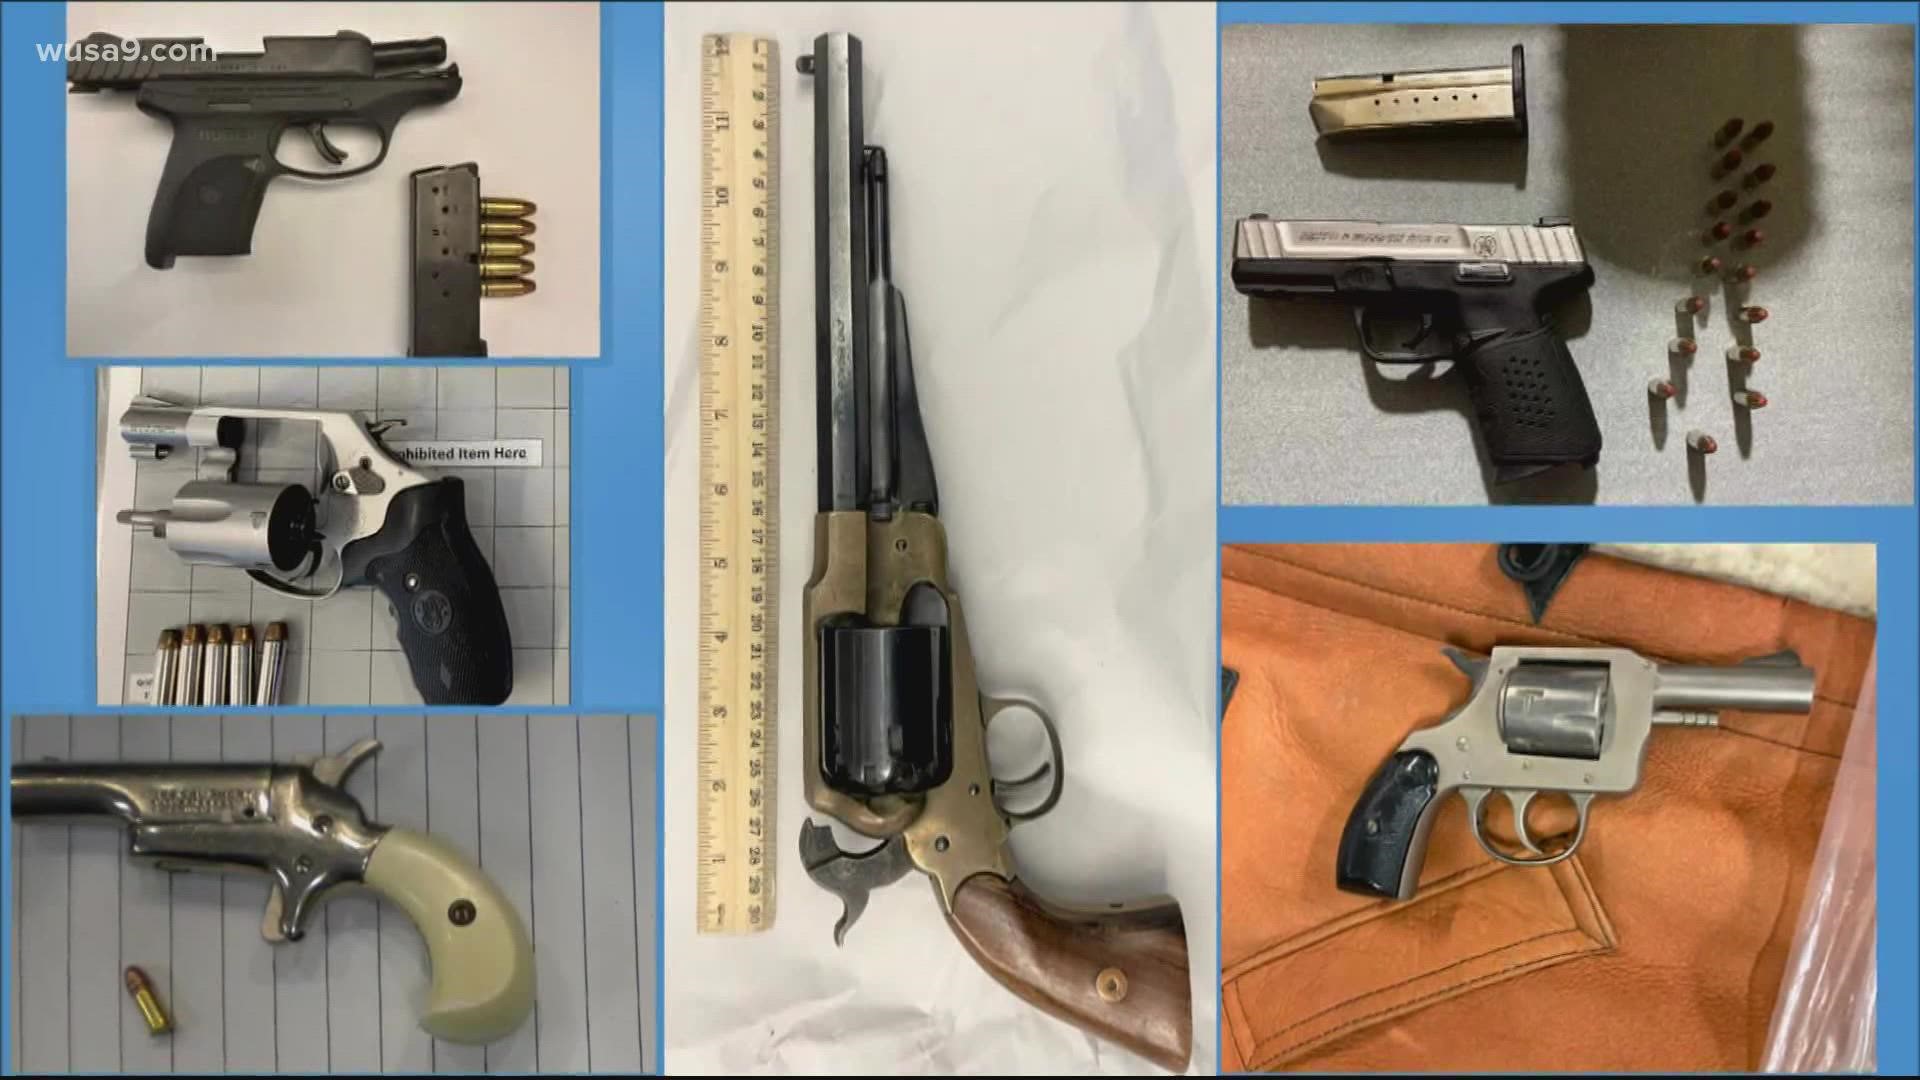 TSA officials confiscated 72 guns from DCA, BWI and IAD security checkpoints in 2021, compared to 30 in 2020 and 60 in 2019.